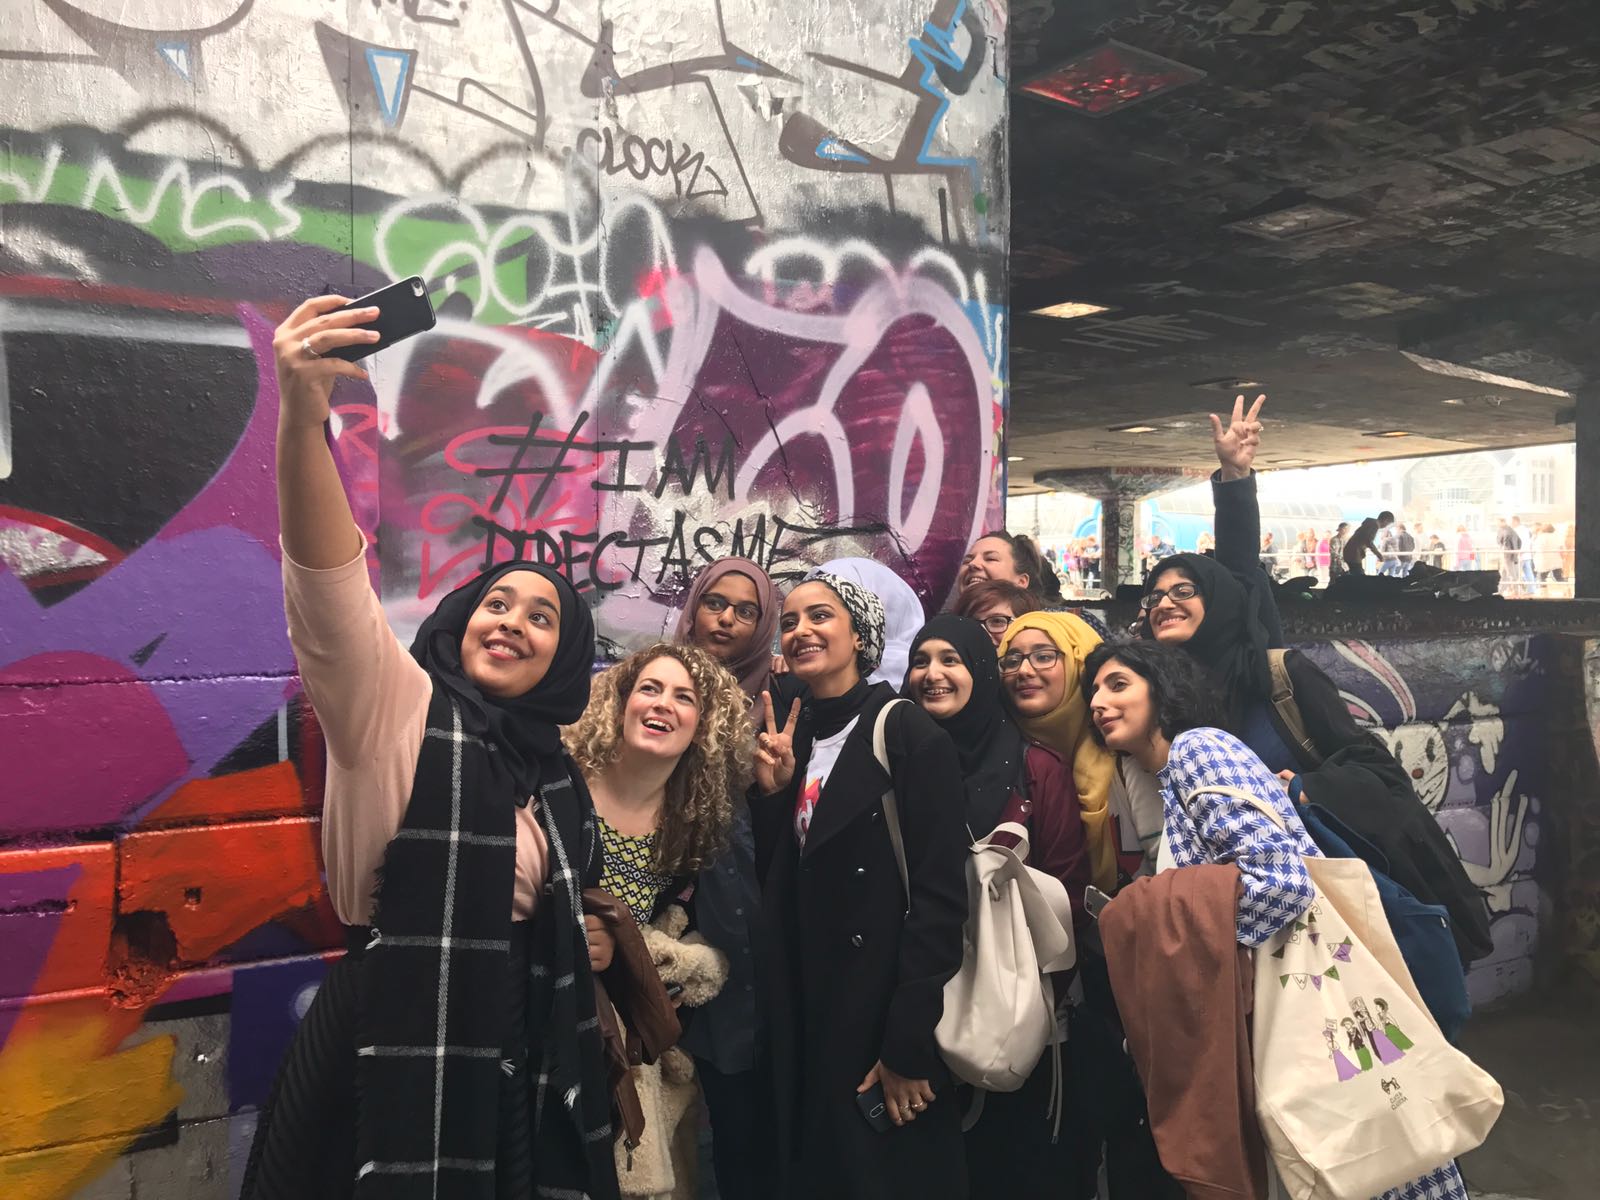 A selfie of the Speakers Corner girls at the southbank centre underground skatepark, in front of some graffiti.